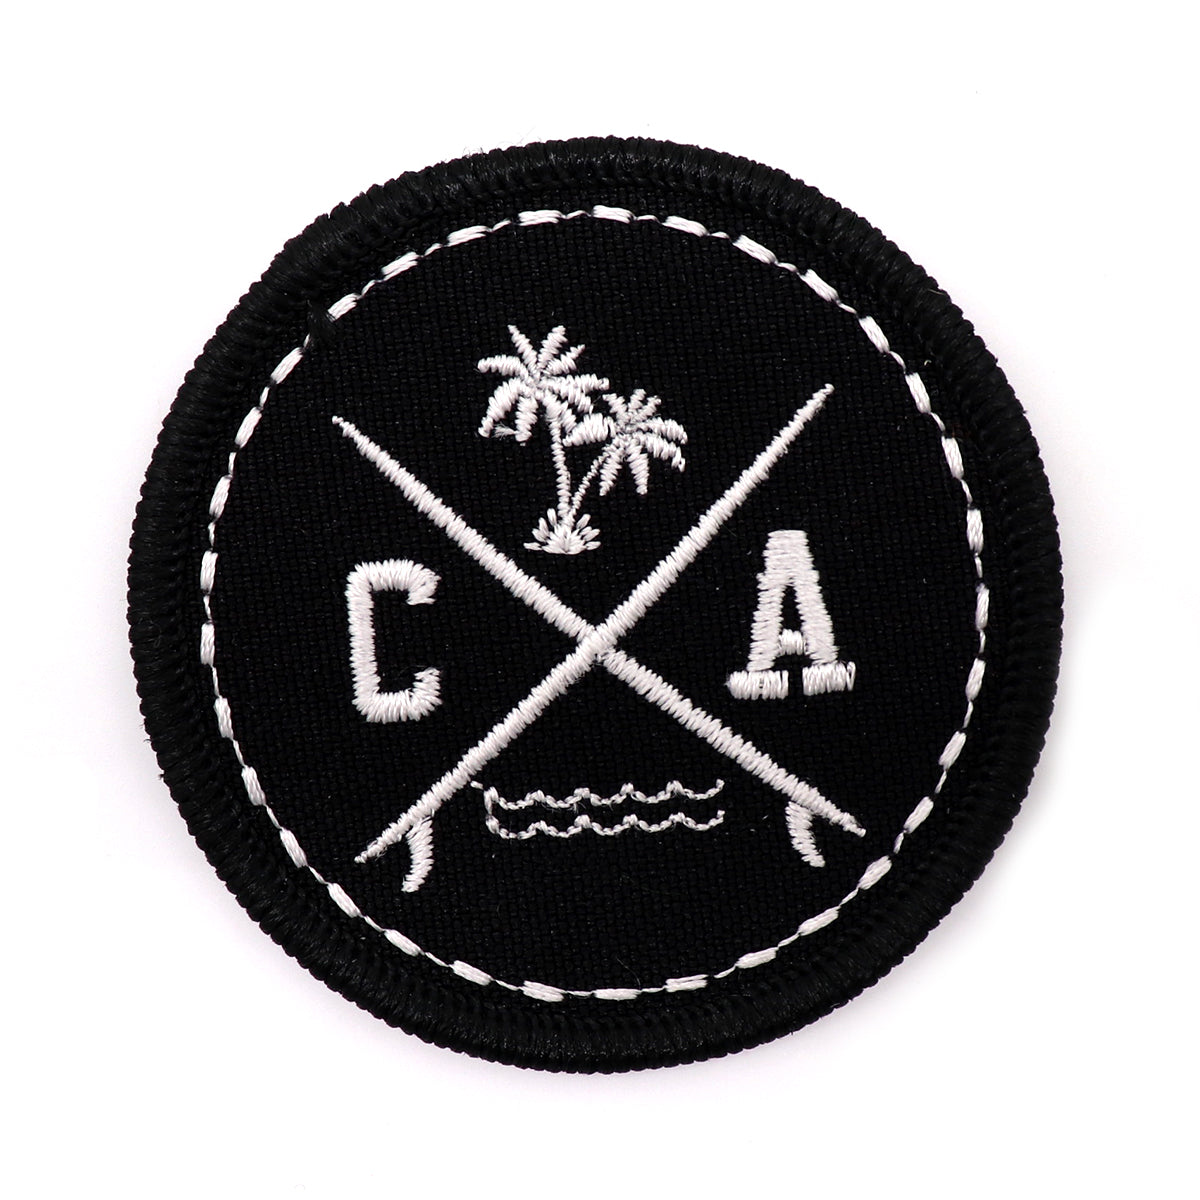 California surf board patch featuring a black circle with embroidered palm trees, surf boards, ocean beach waves, and letters CA. Great addition to sew on to your backpack, jacket, or any fabric. Exclusively sold by SDTrading Co.